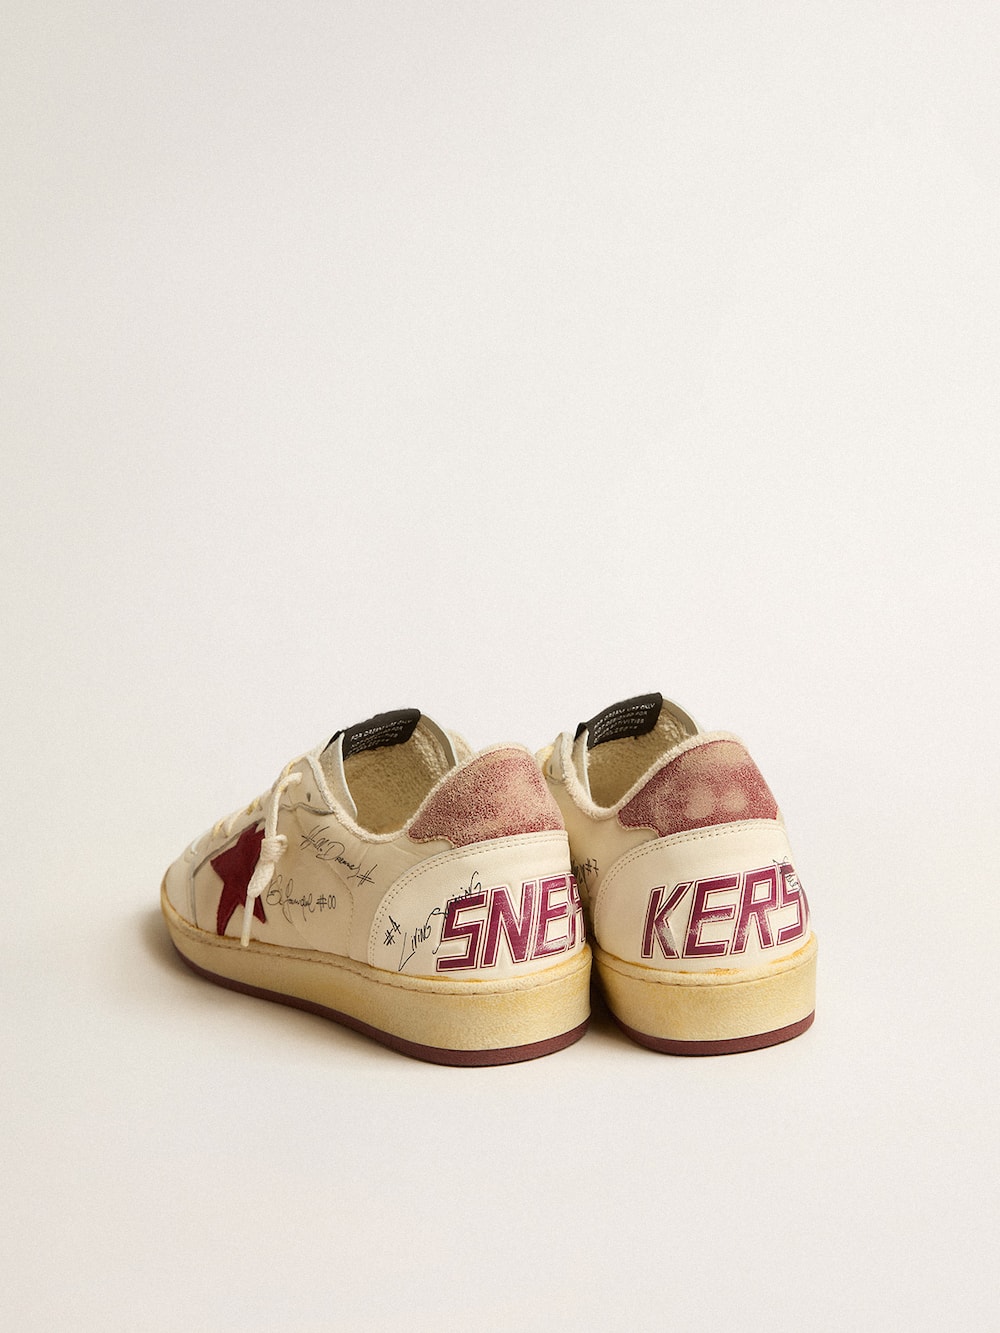 Golden Goose - Men's Ball Star LTD in nylon with pomegranate suede star and leather heel tab in 